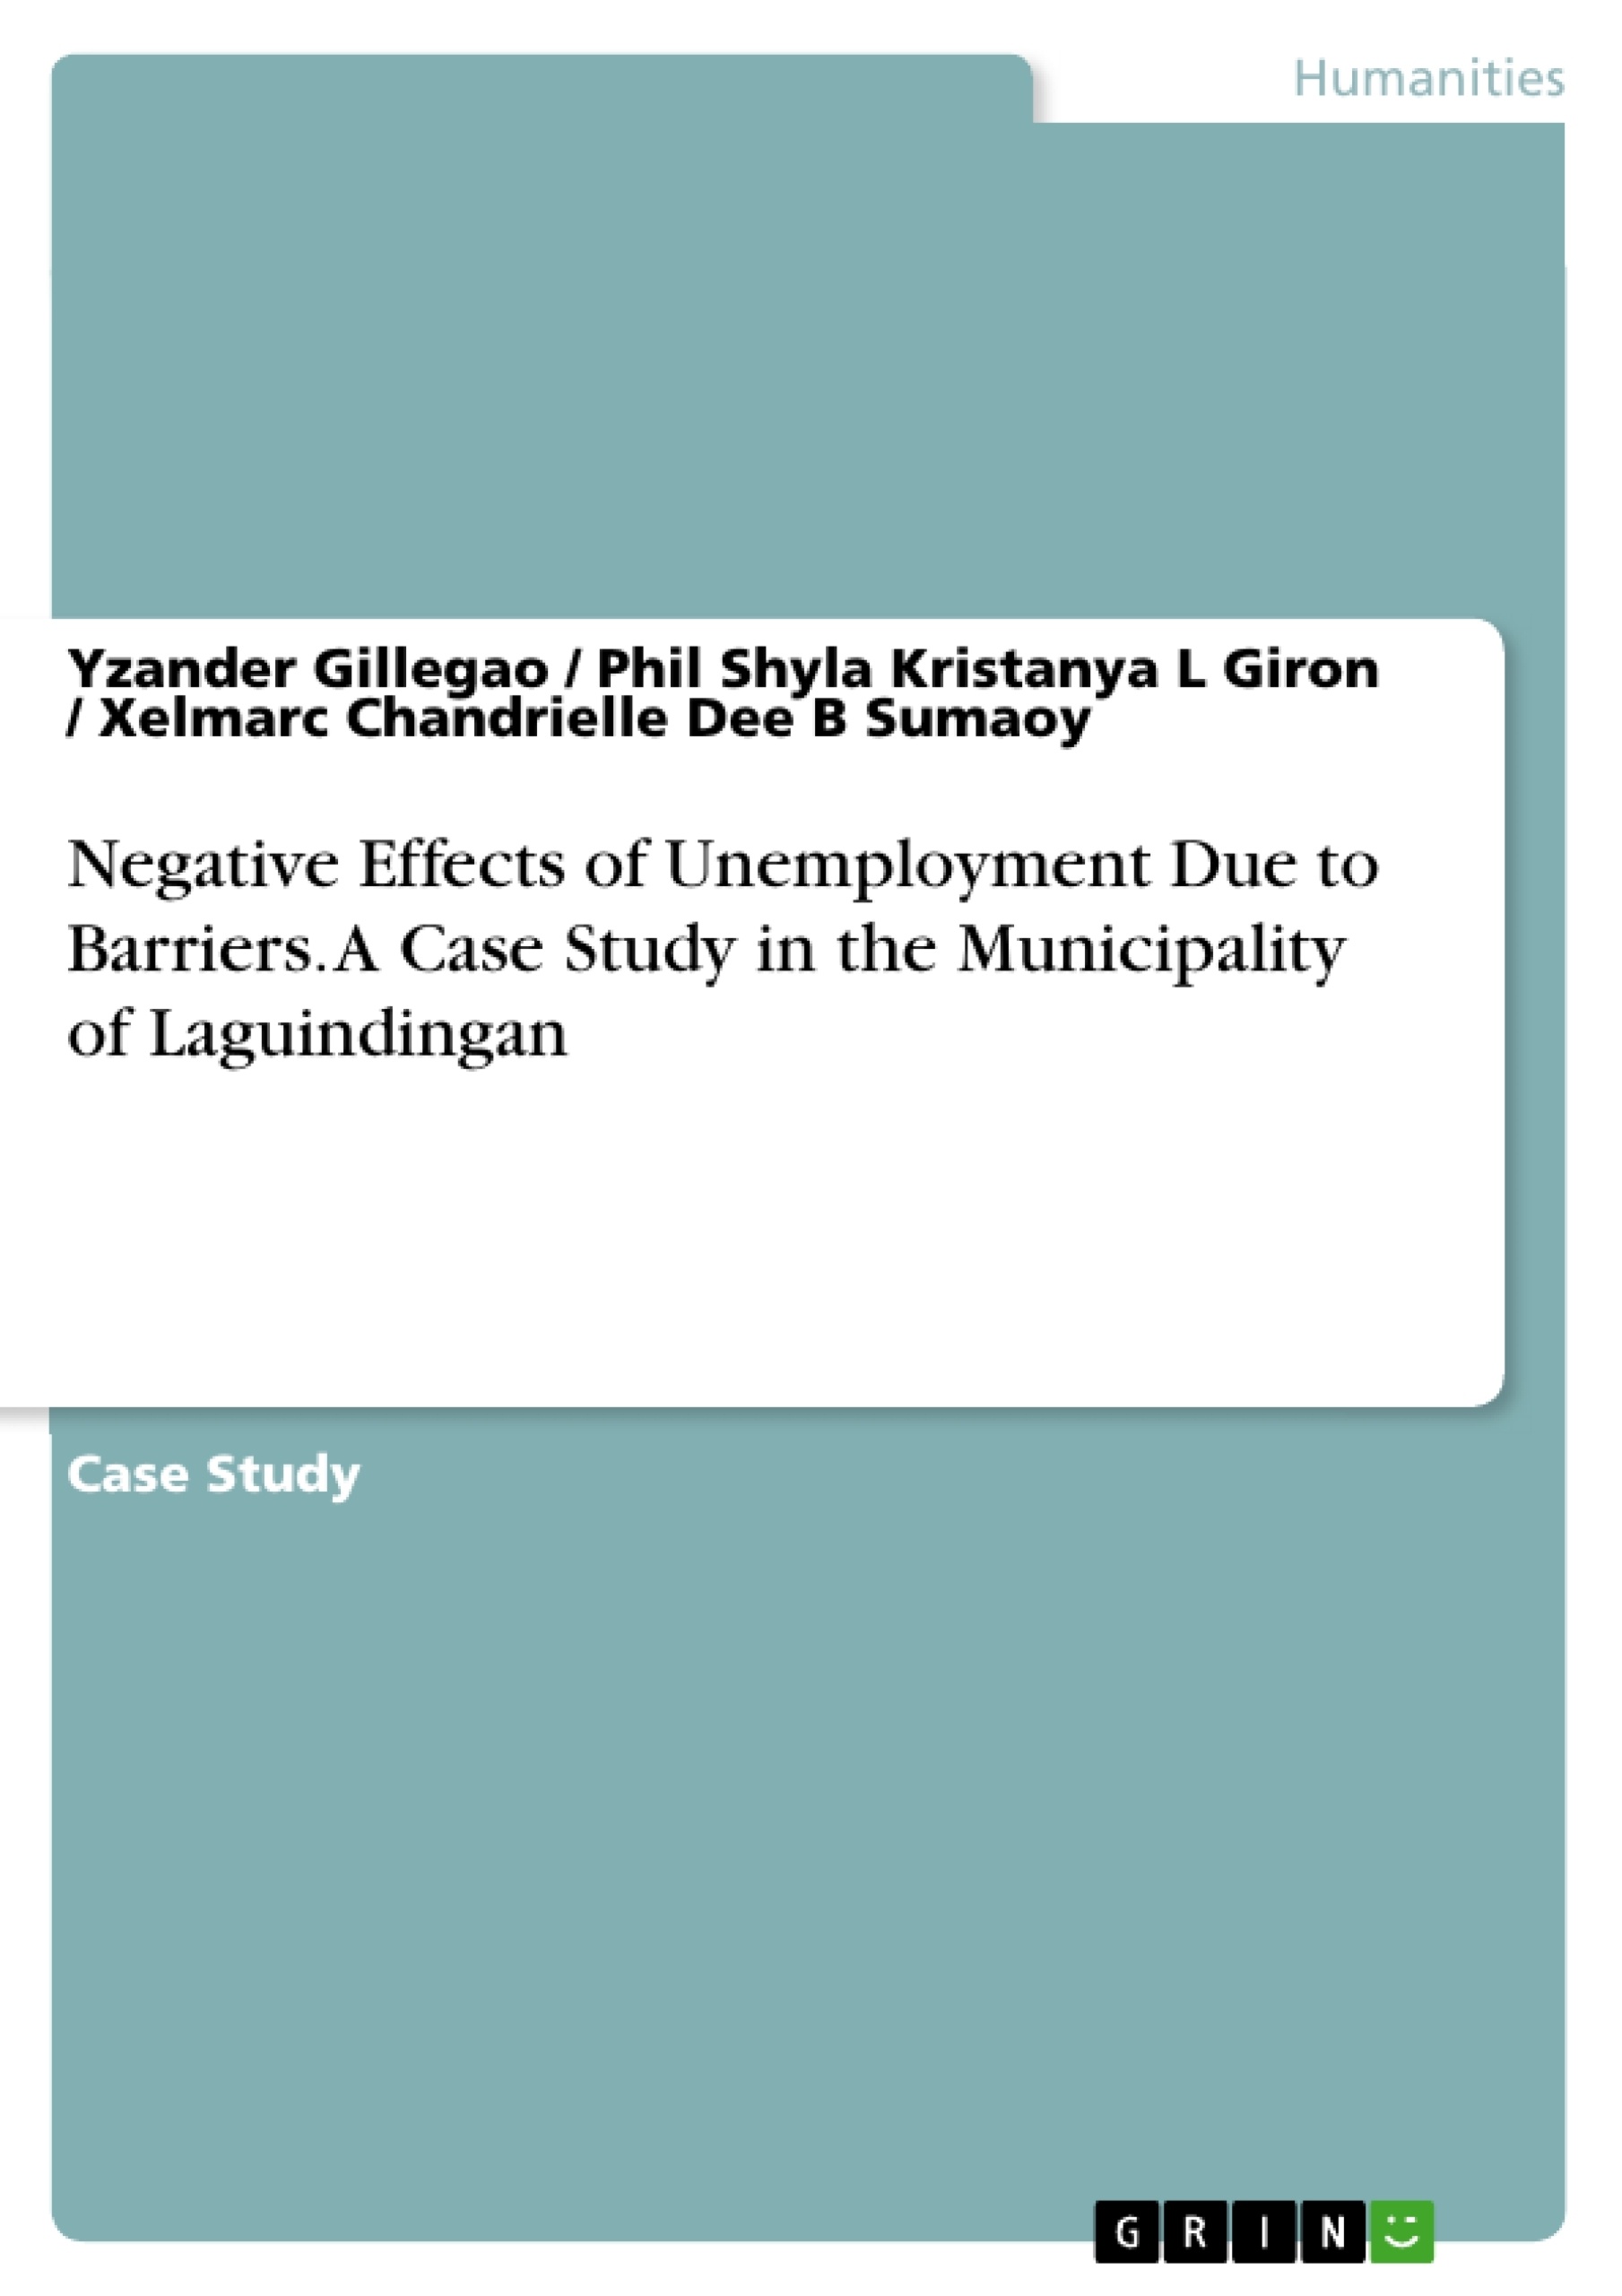 Titel: Negative Effects of Unemployment Due to Barriers. A Case Study in the Municipality of Laguindingan